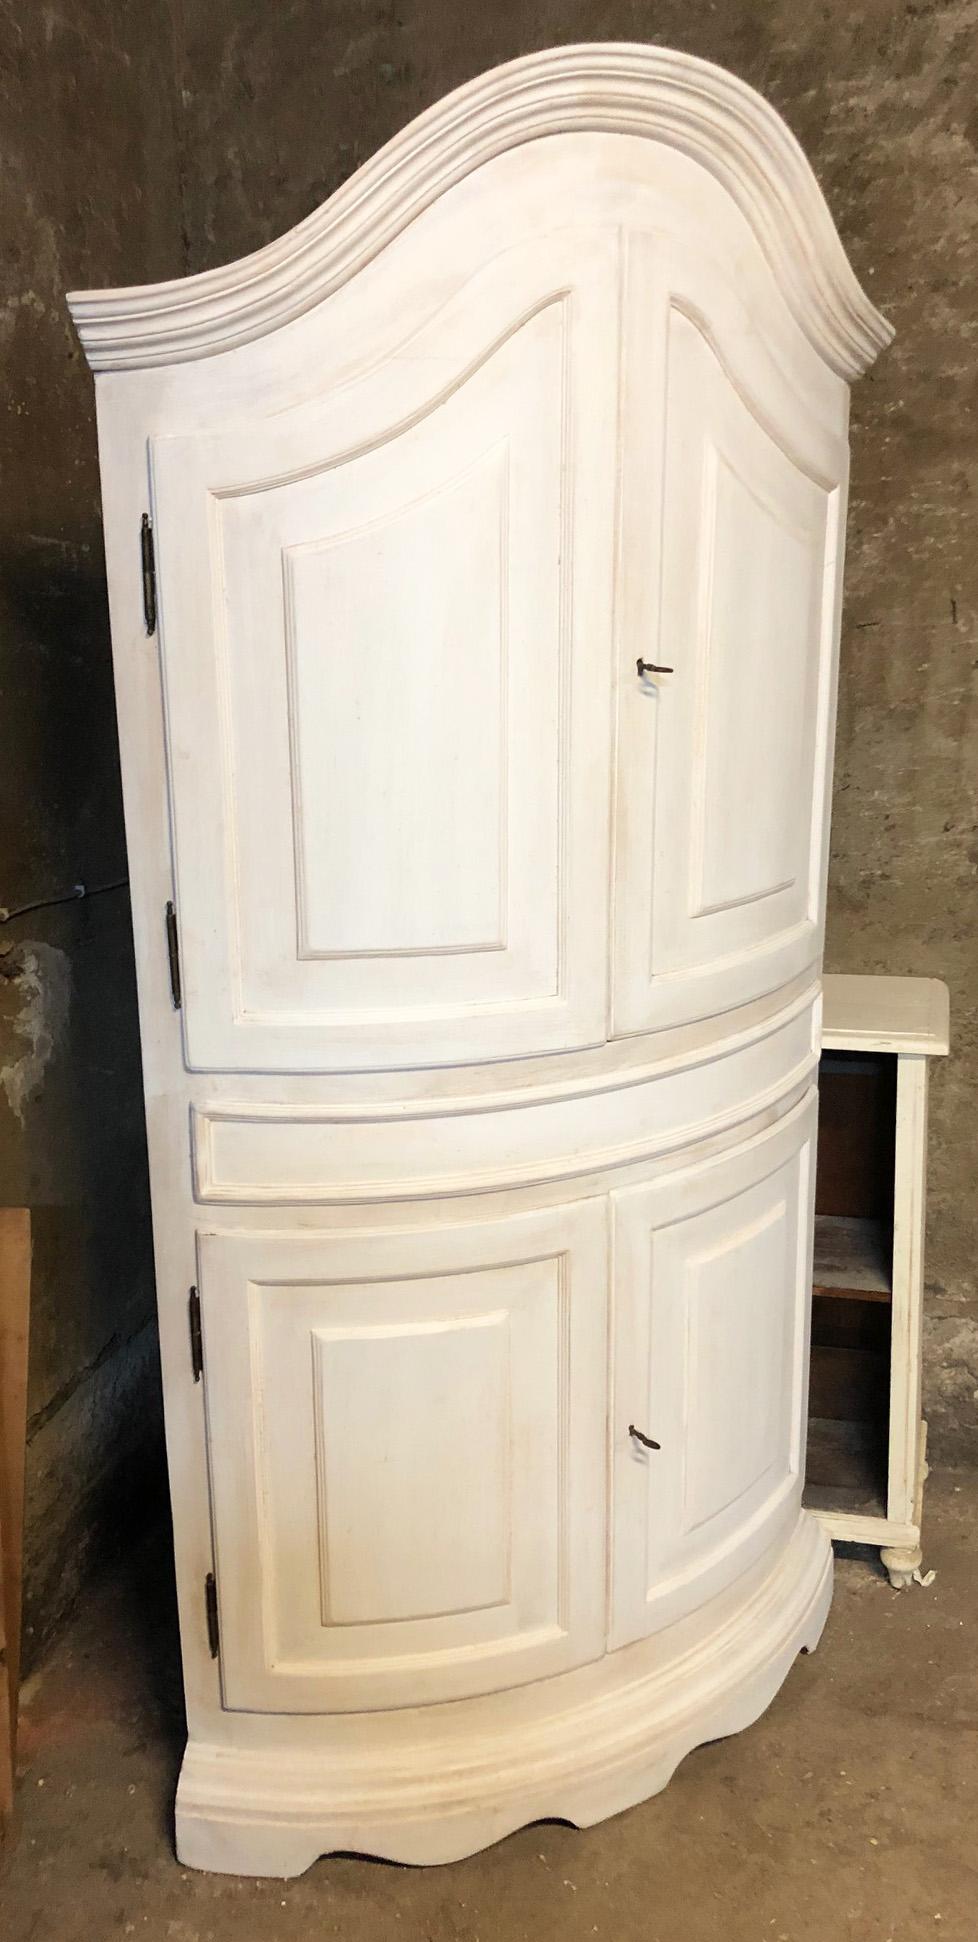 Curved corner unit with 4 doors, rarity, Tuscany, shabby white color, in fir, with two internal shelves.
Measure: Sides 70cm and maximum height 207, note that the diagonal is curved
Period: about 1930.
Comes from an old country house in the Lucca